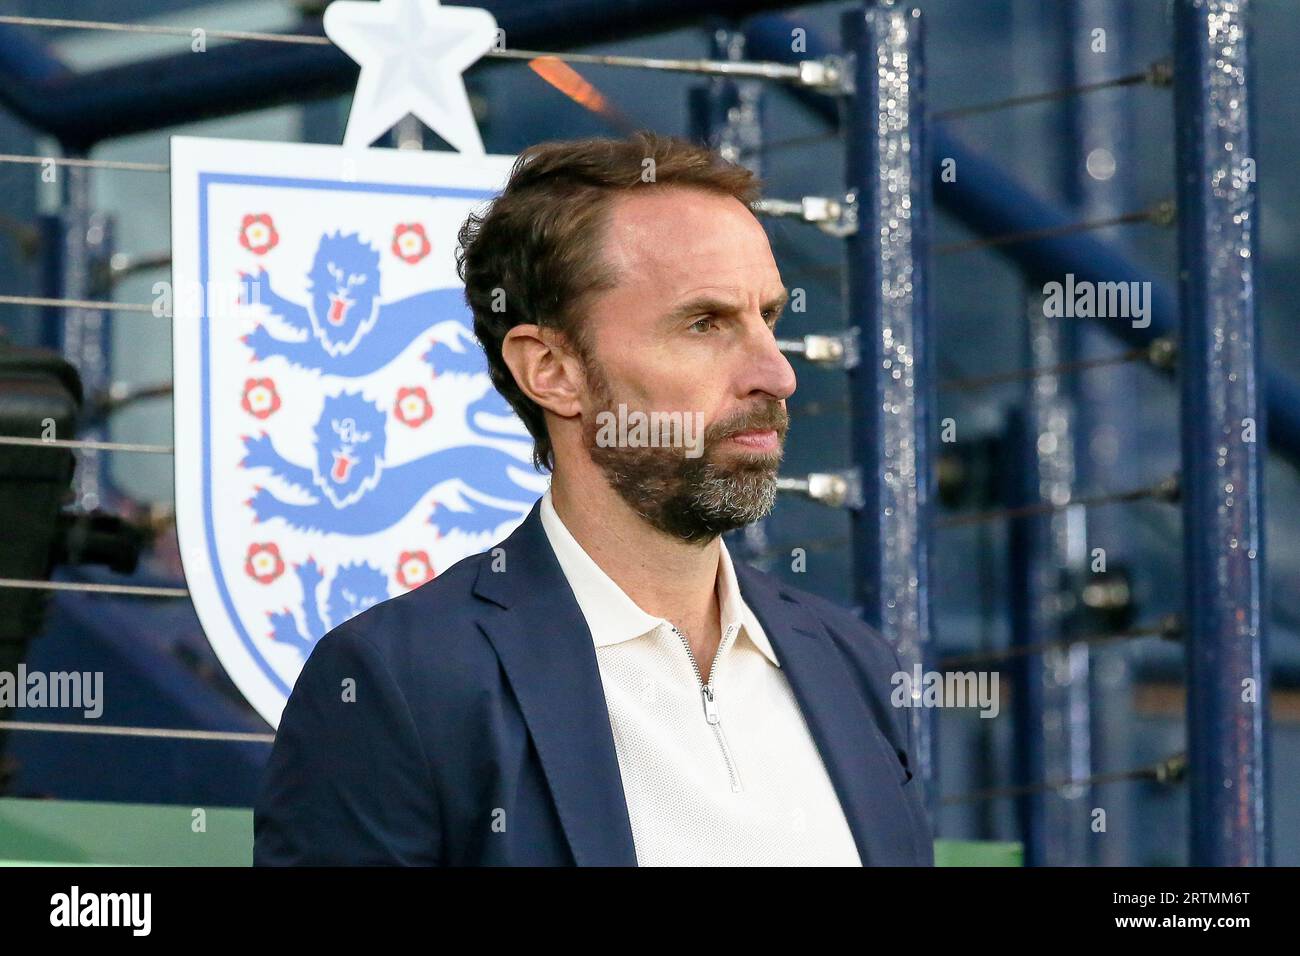 GARETH SOUTHGATE, coach and manager of the English national football team. Image taken at Hampden Park, Glasgow, during the 150th Anniversary Heritage Stock Photo